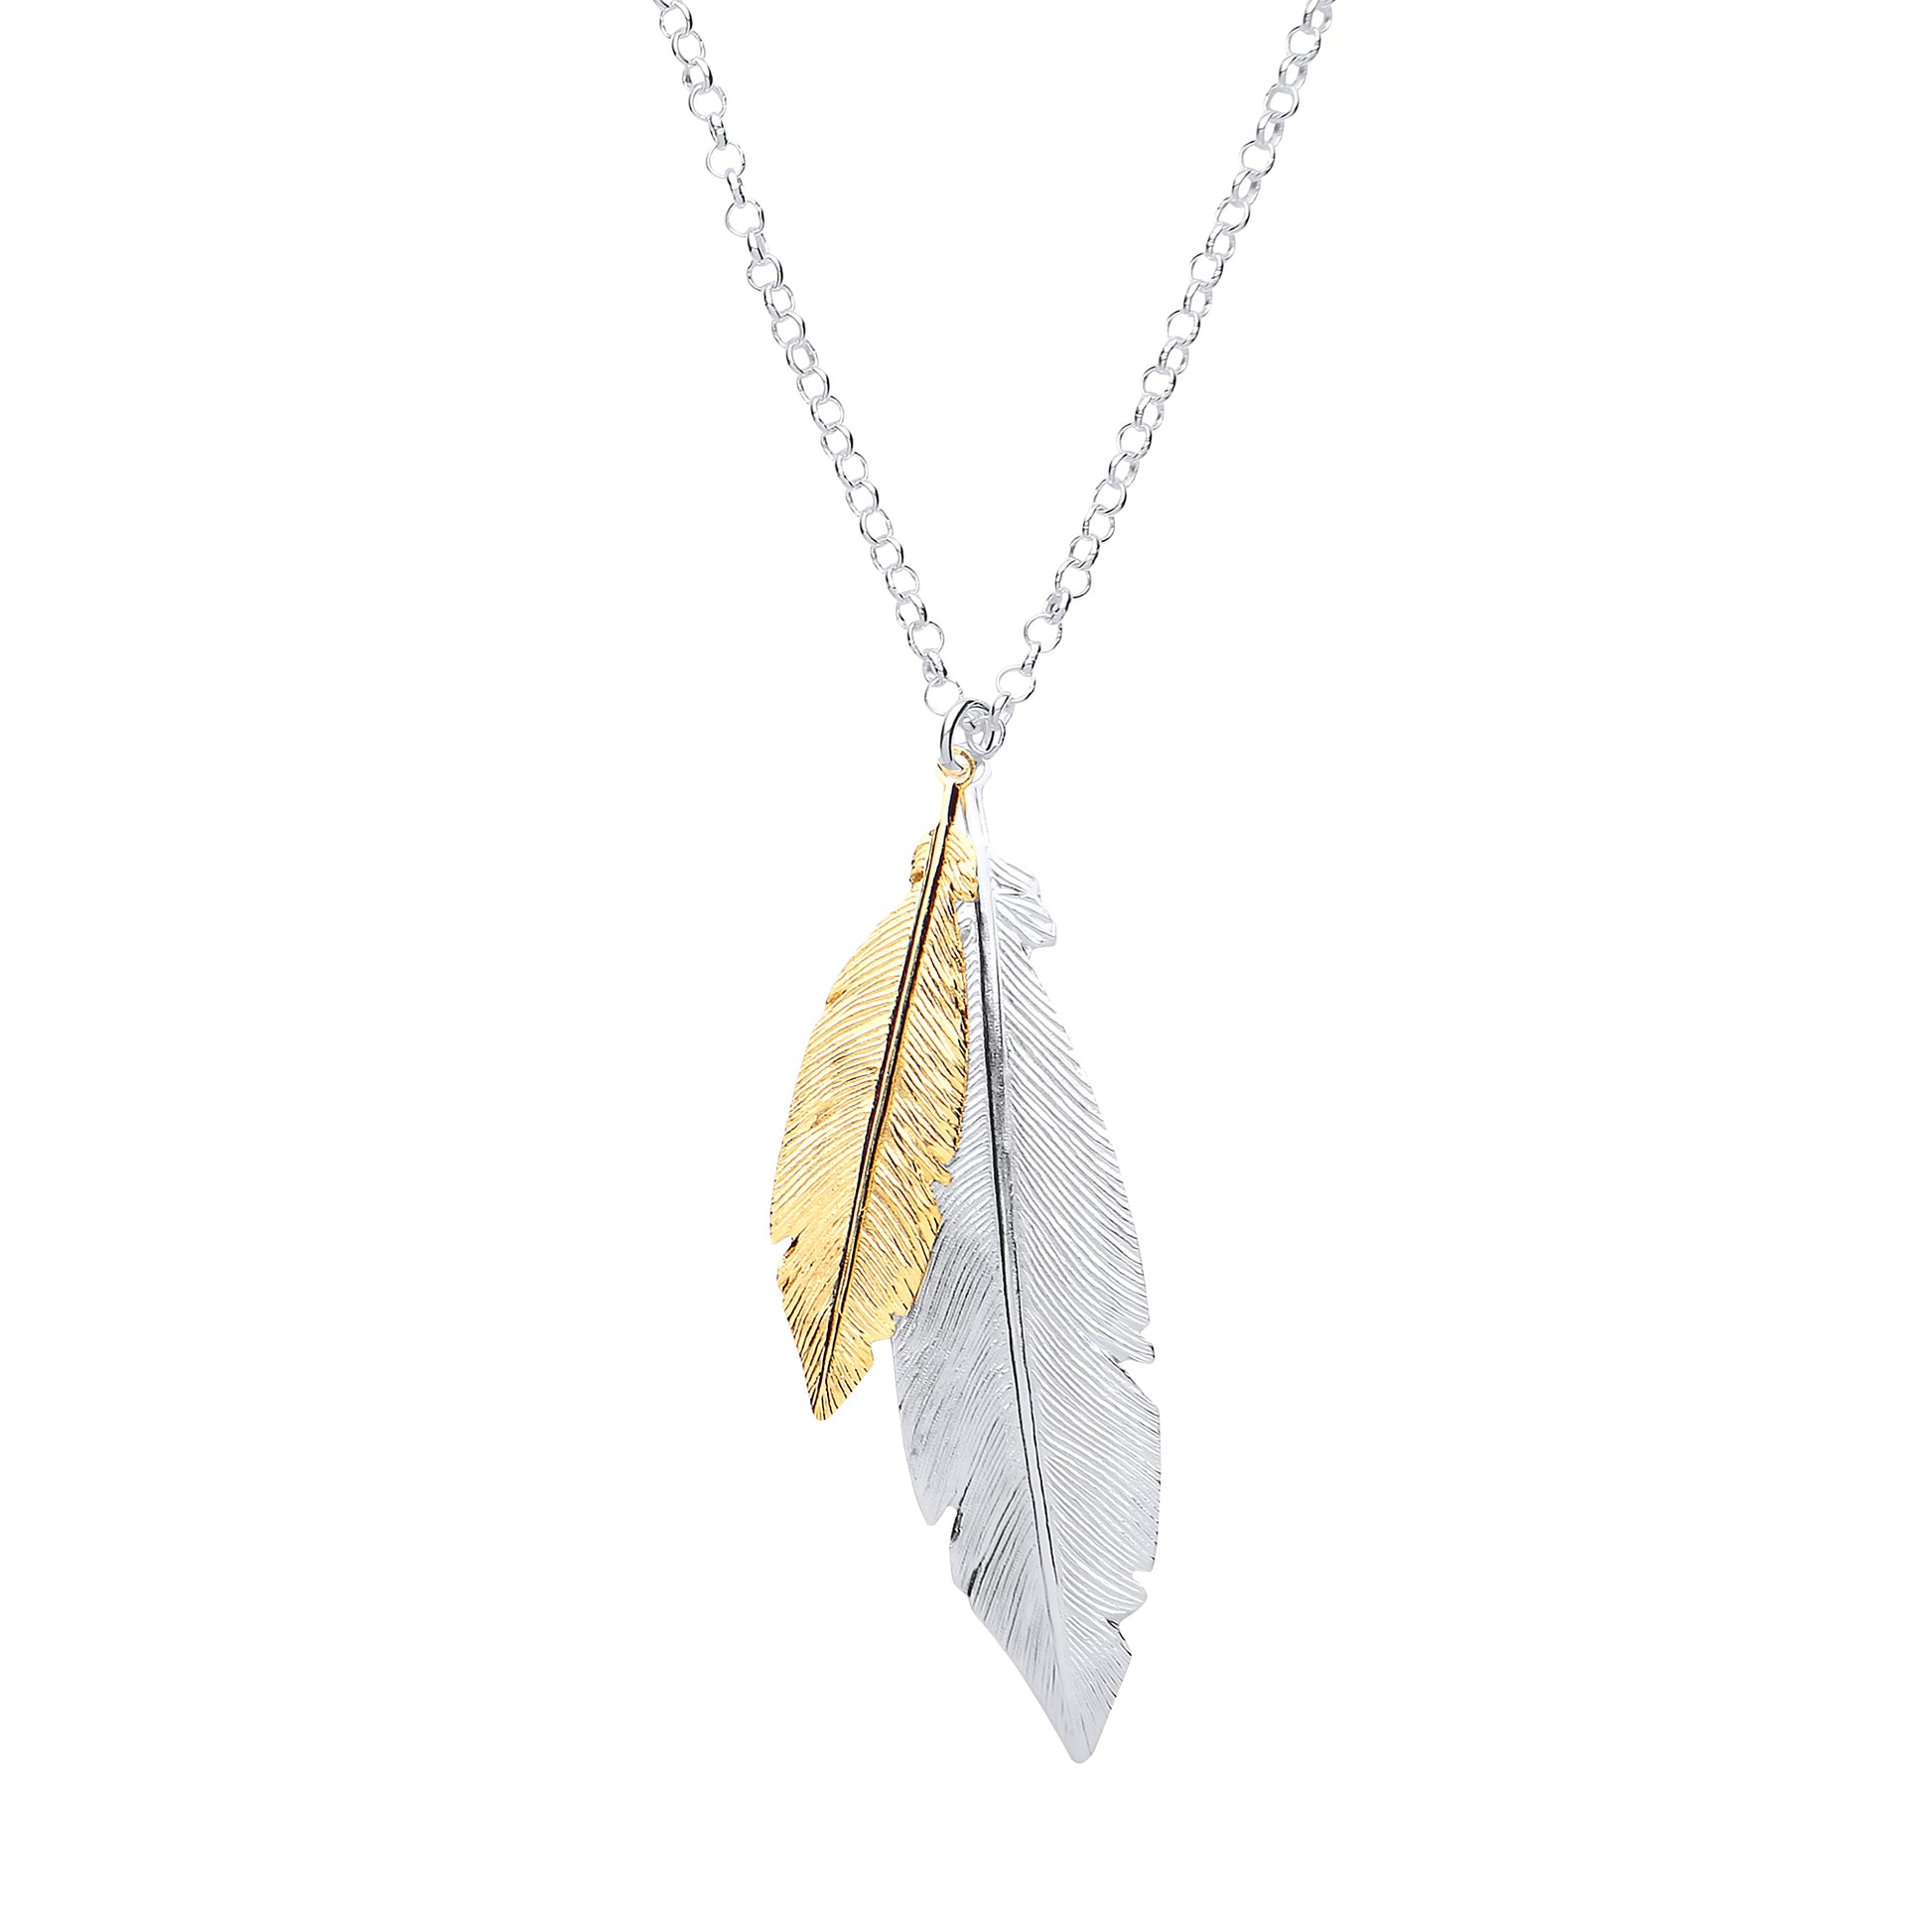 Gilded Silver  Angel Wing Feather Charm Necklace 16 + 1 inch - GVK195